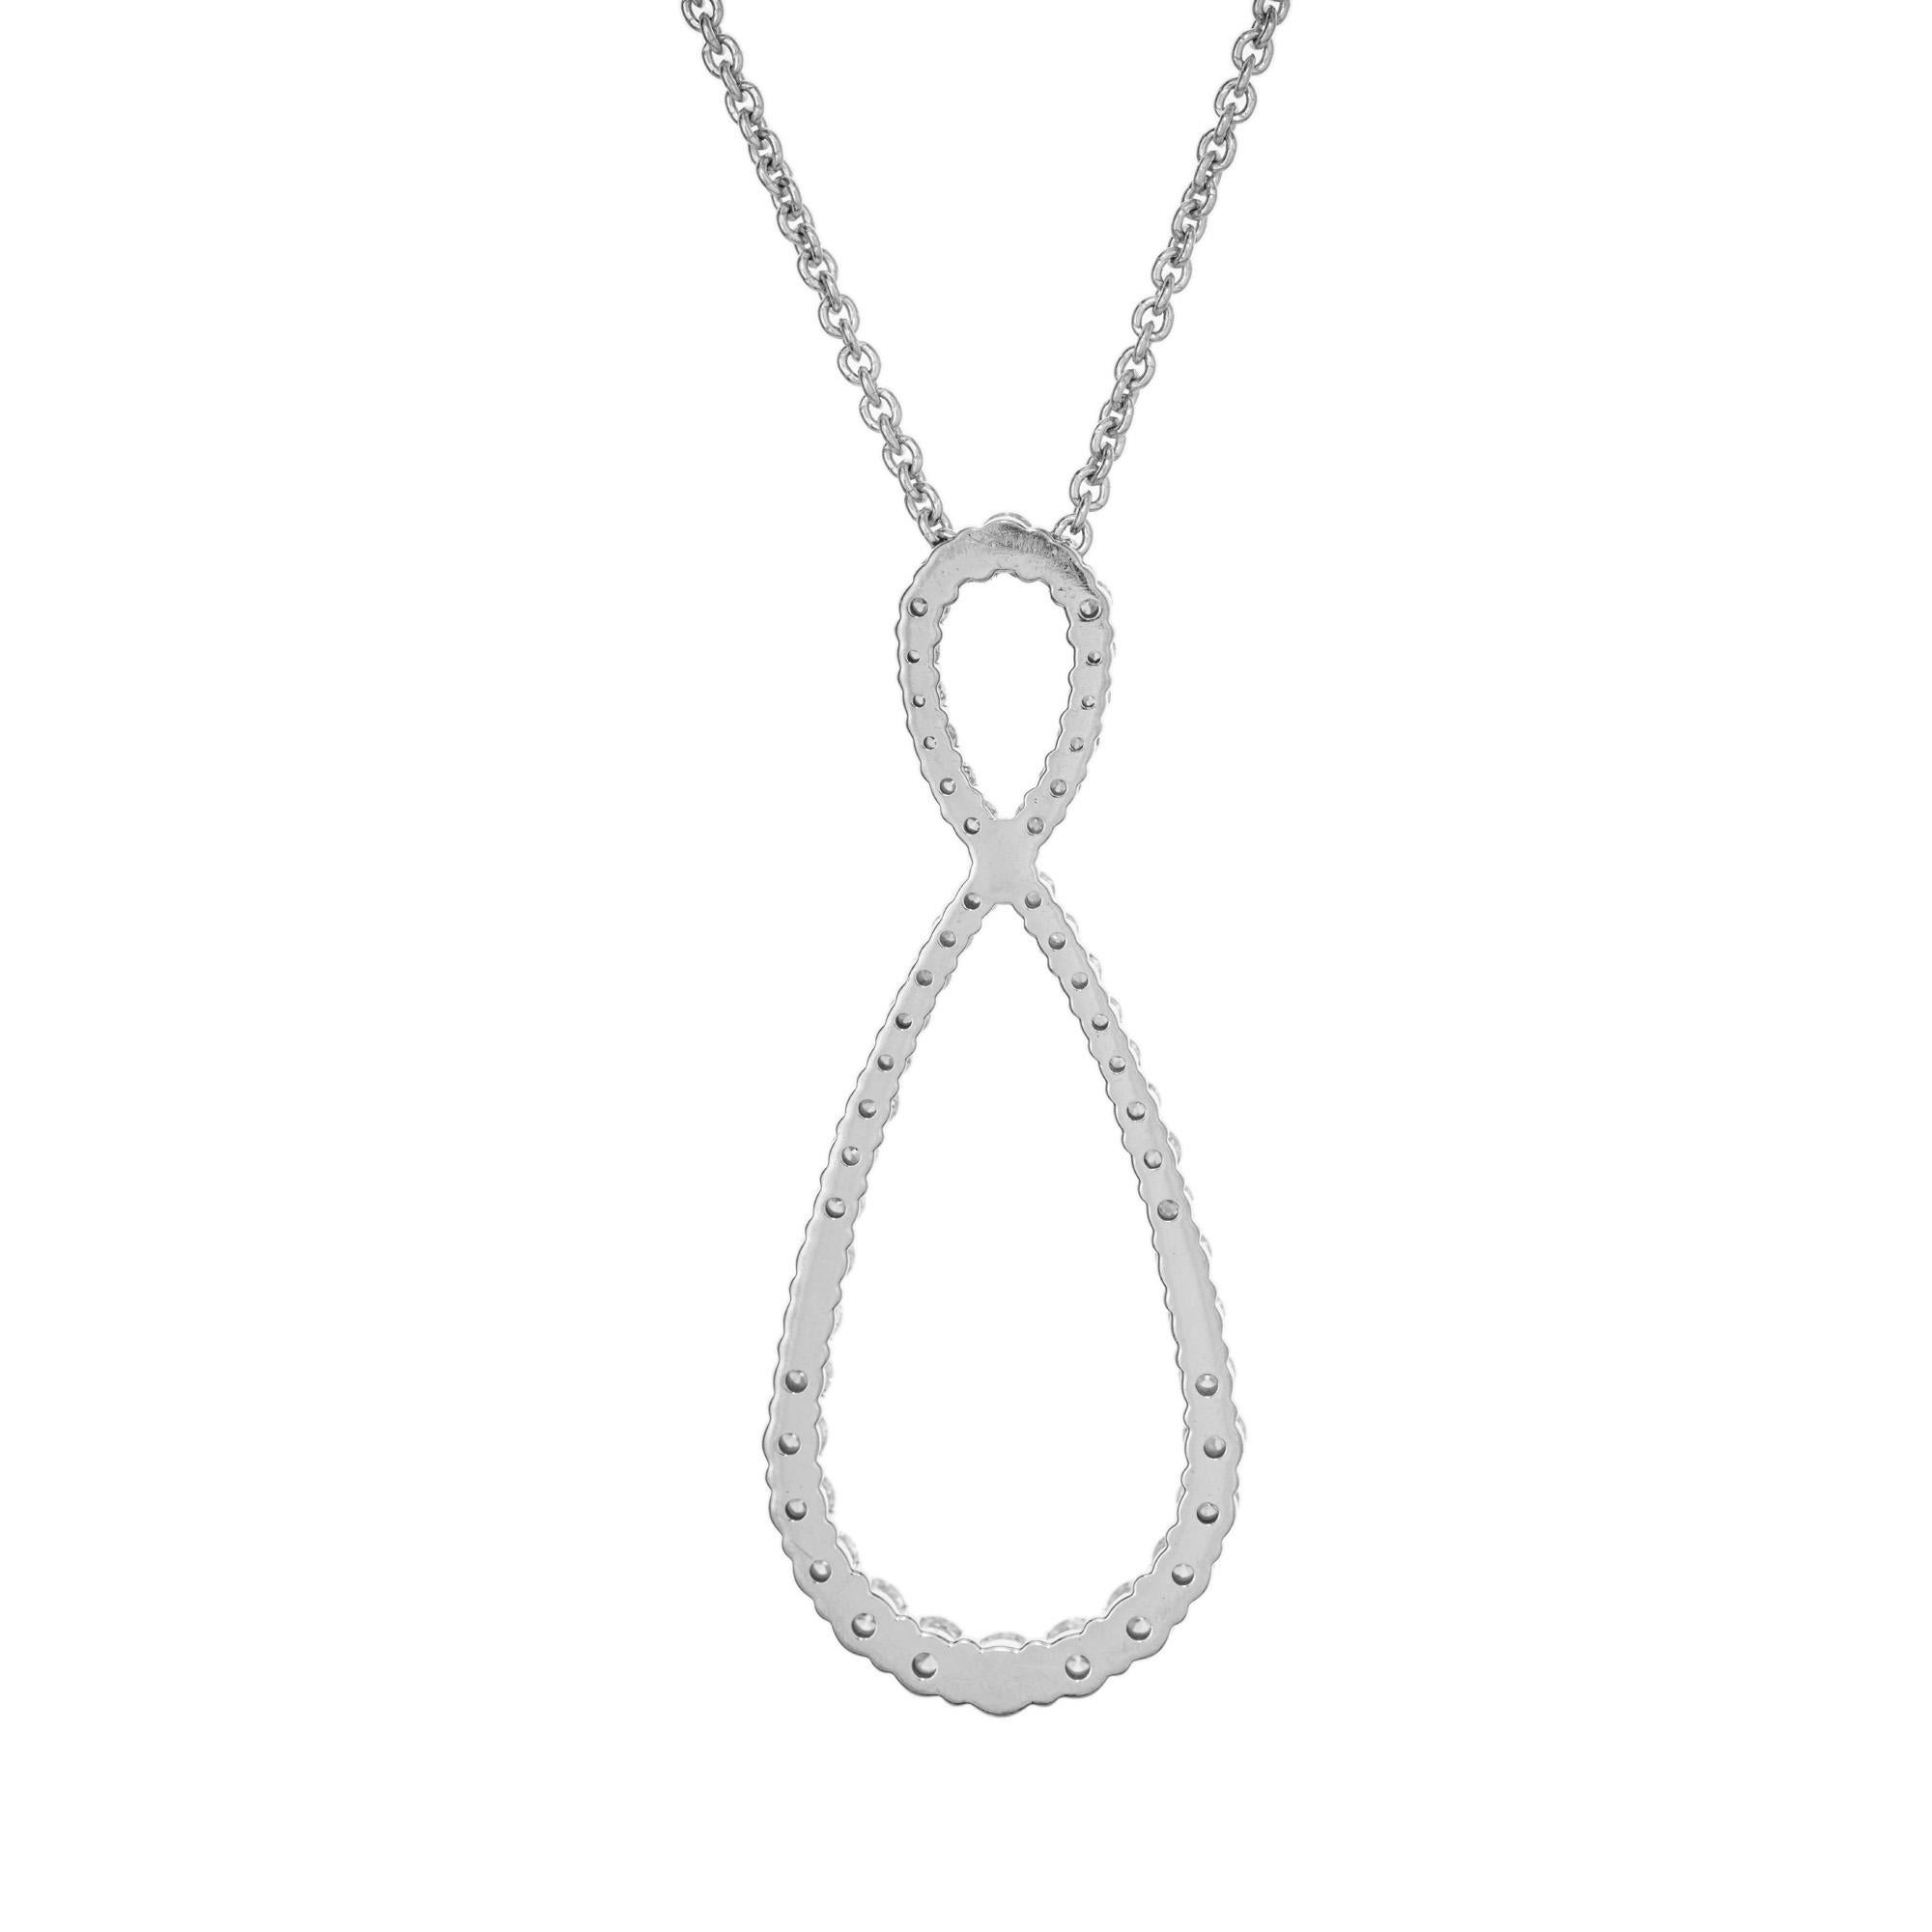 Hearts on Fire, sweeping swirl design diamond pendant necklace. 49 round diamonds totaling 1.35cts, set in 18k white gold swirl loop setting, with a 20 inch adjustable chain.

49 round HOF diamonds, G-H SI approx. 1.35cts
18k white gold 
Stamped: